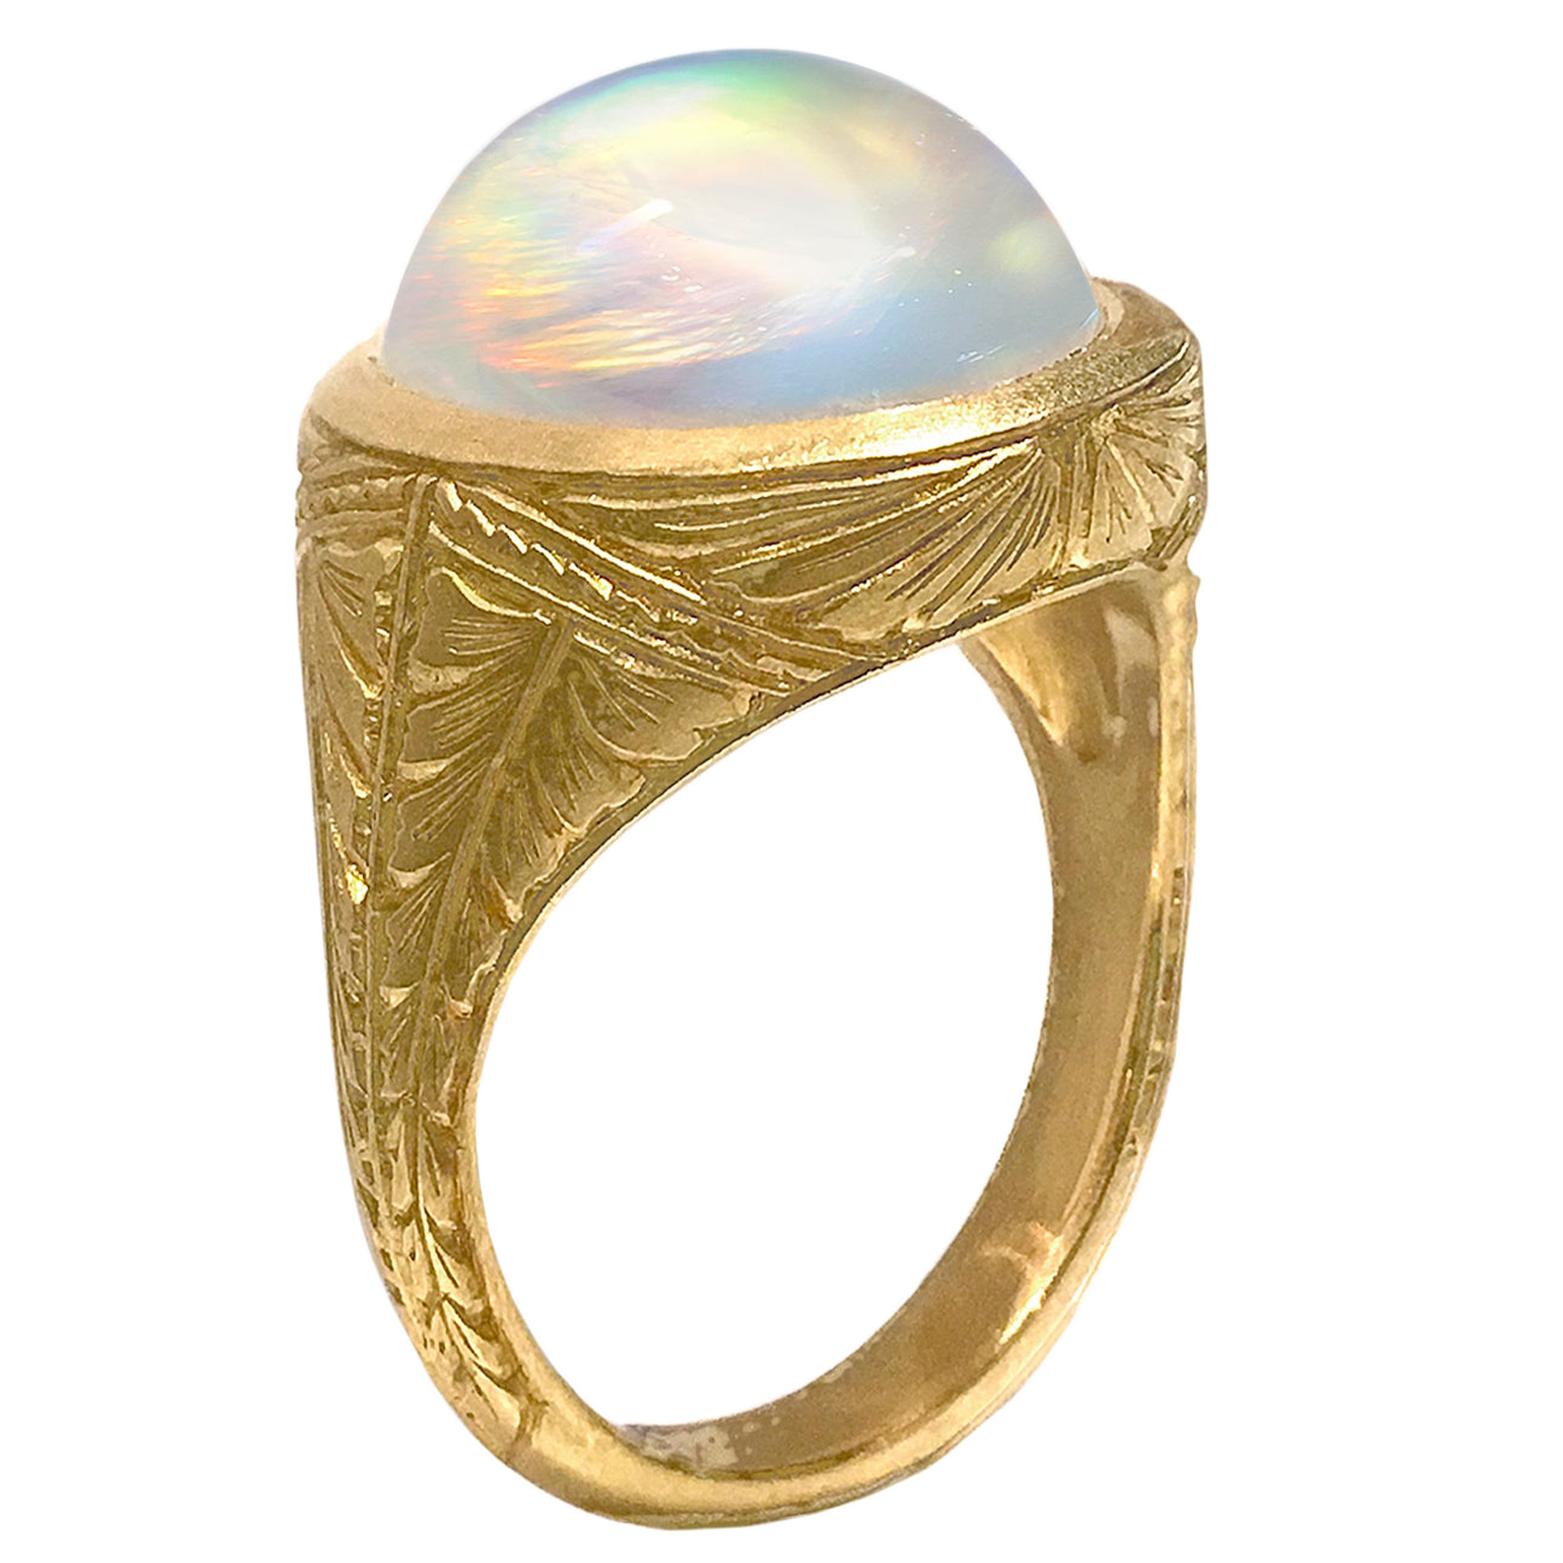 Lilly Fitzgerald Extraordinary Oval Rainbow Moonstone Carved Gold Relic Ring